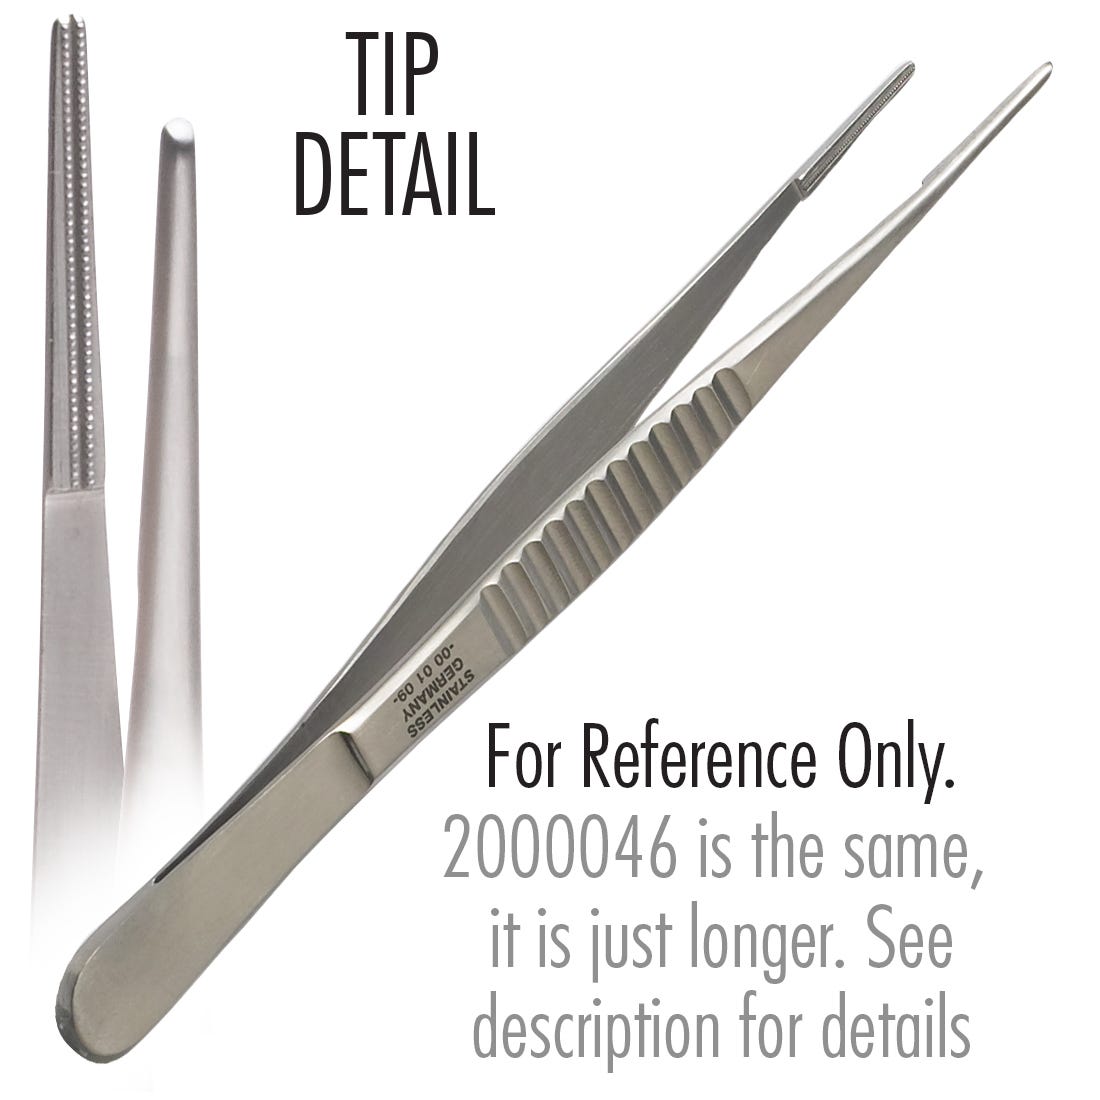 ACE DeBakey Tissue Forceps, 1.5mm wide tips, large